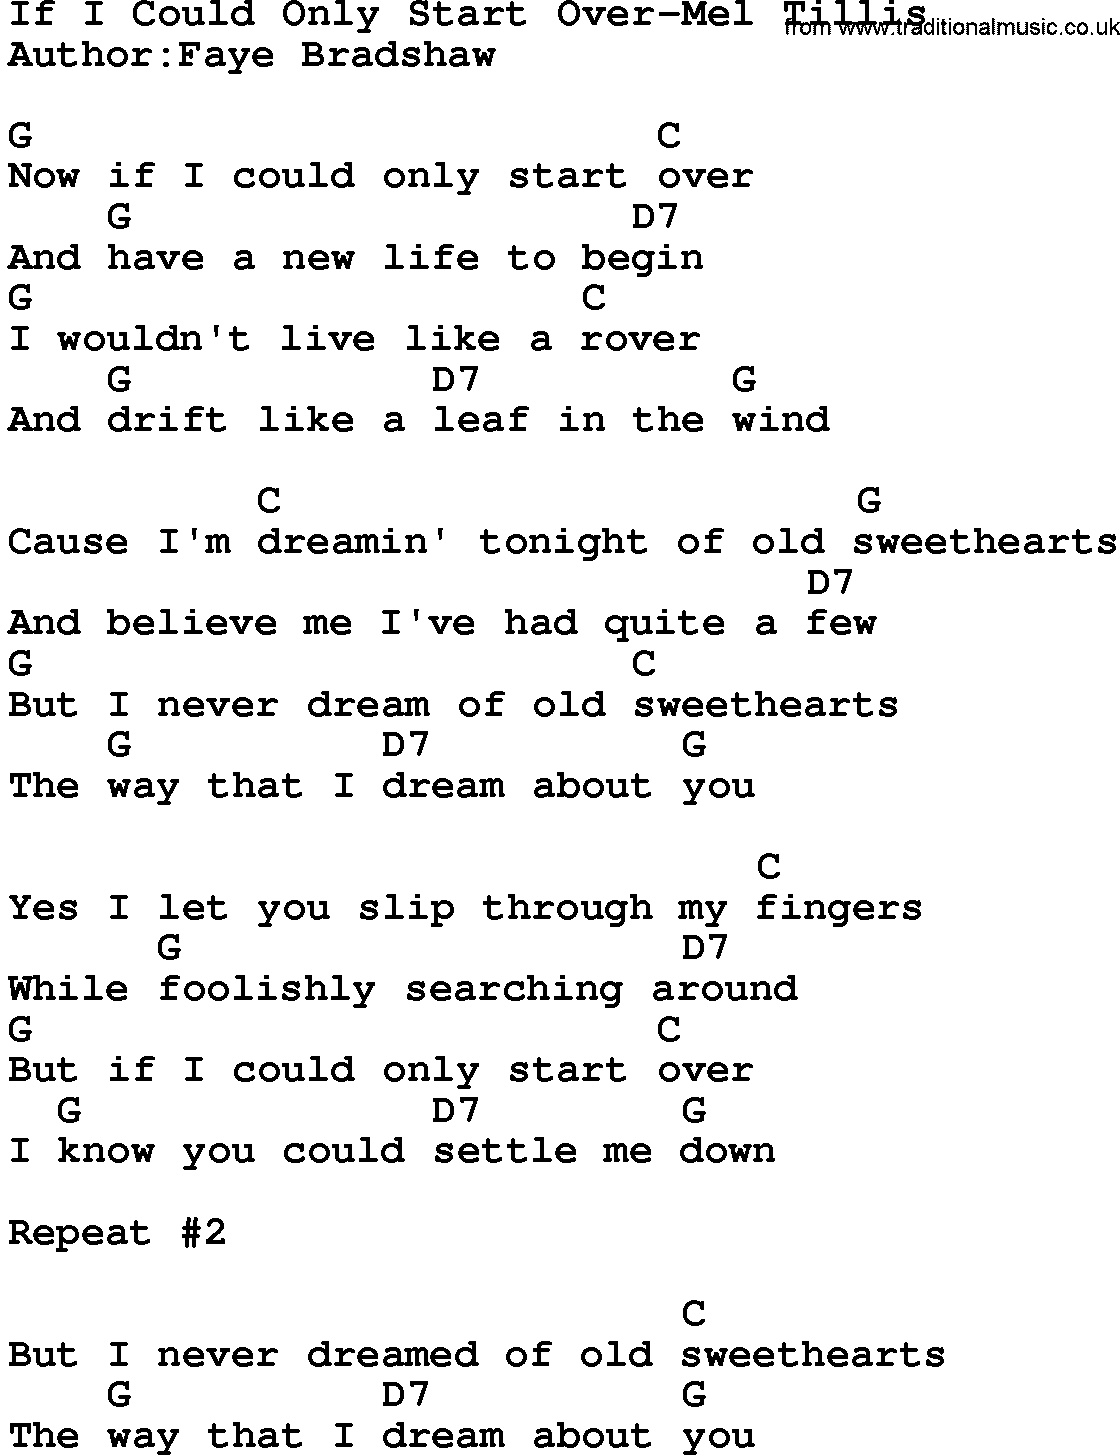 Country music song: If I Could Only Start Over-Mel Tillis lyrics and chords